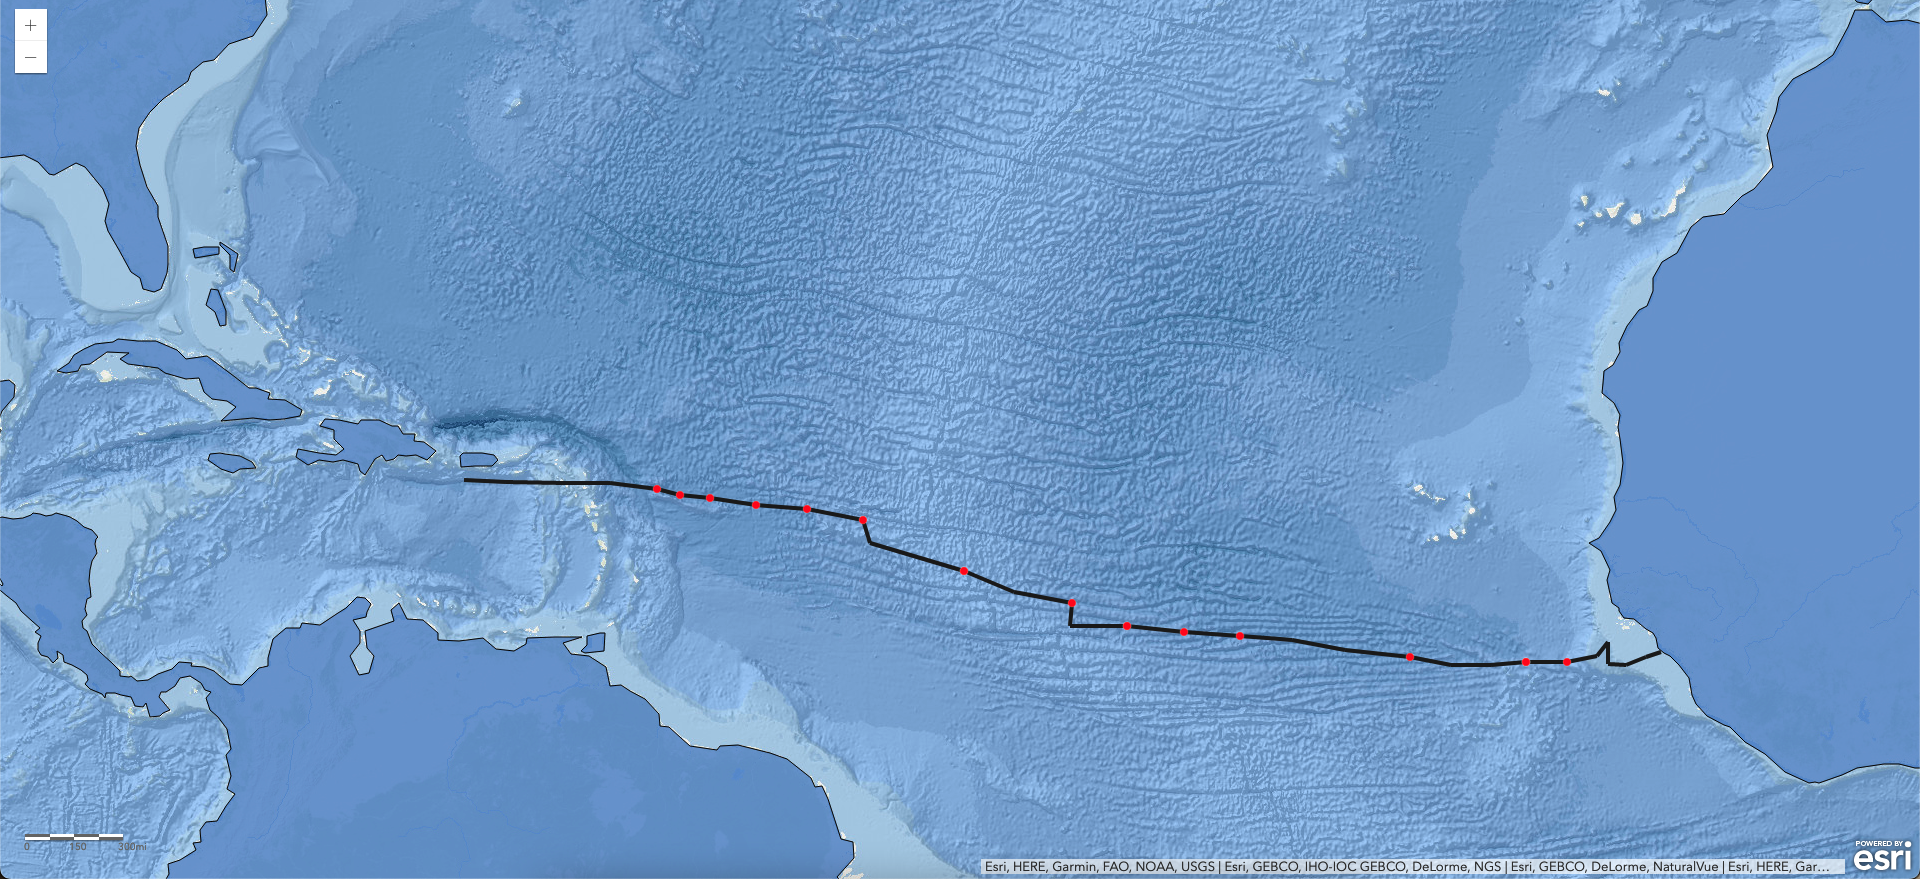 GIS rendering of the voyage of the *Good Hope*